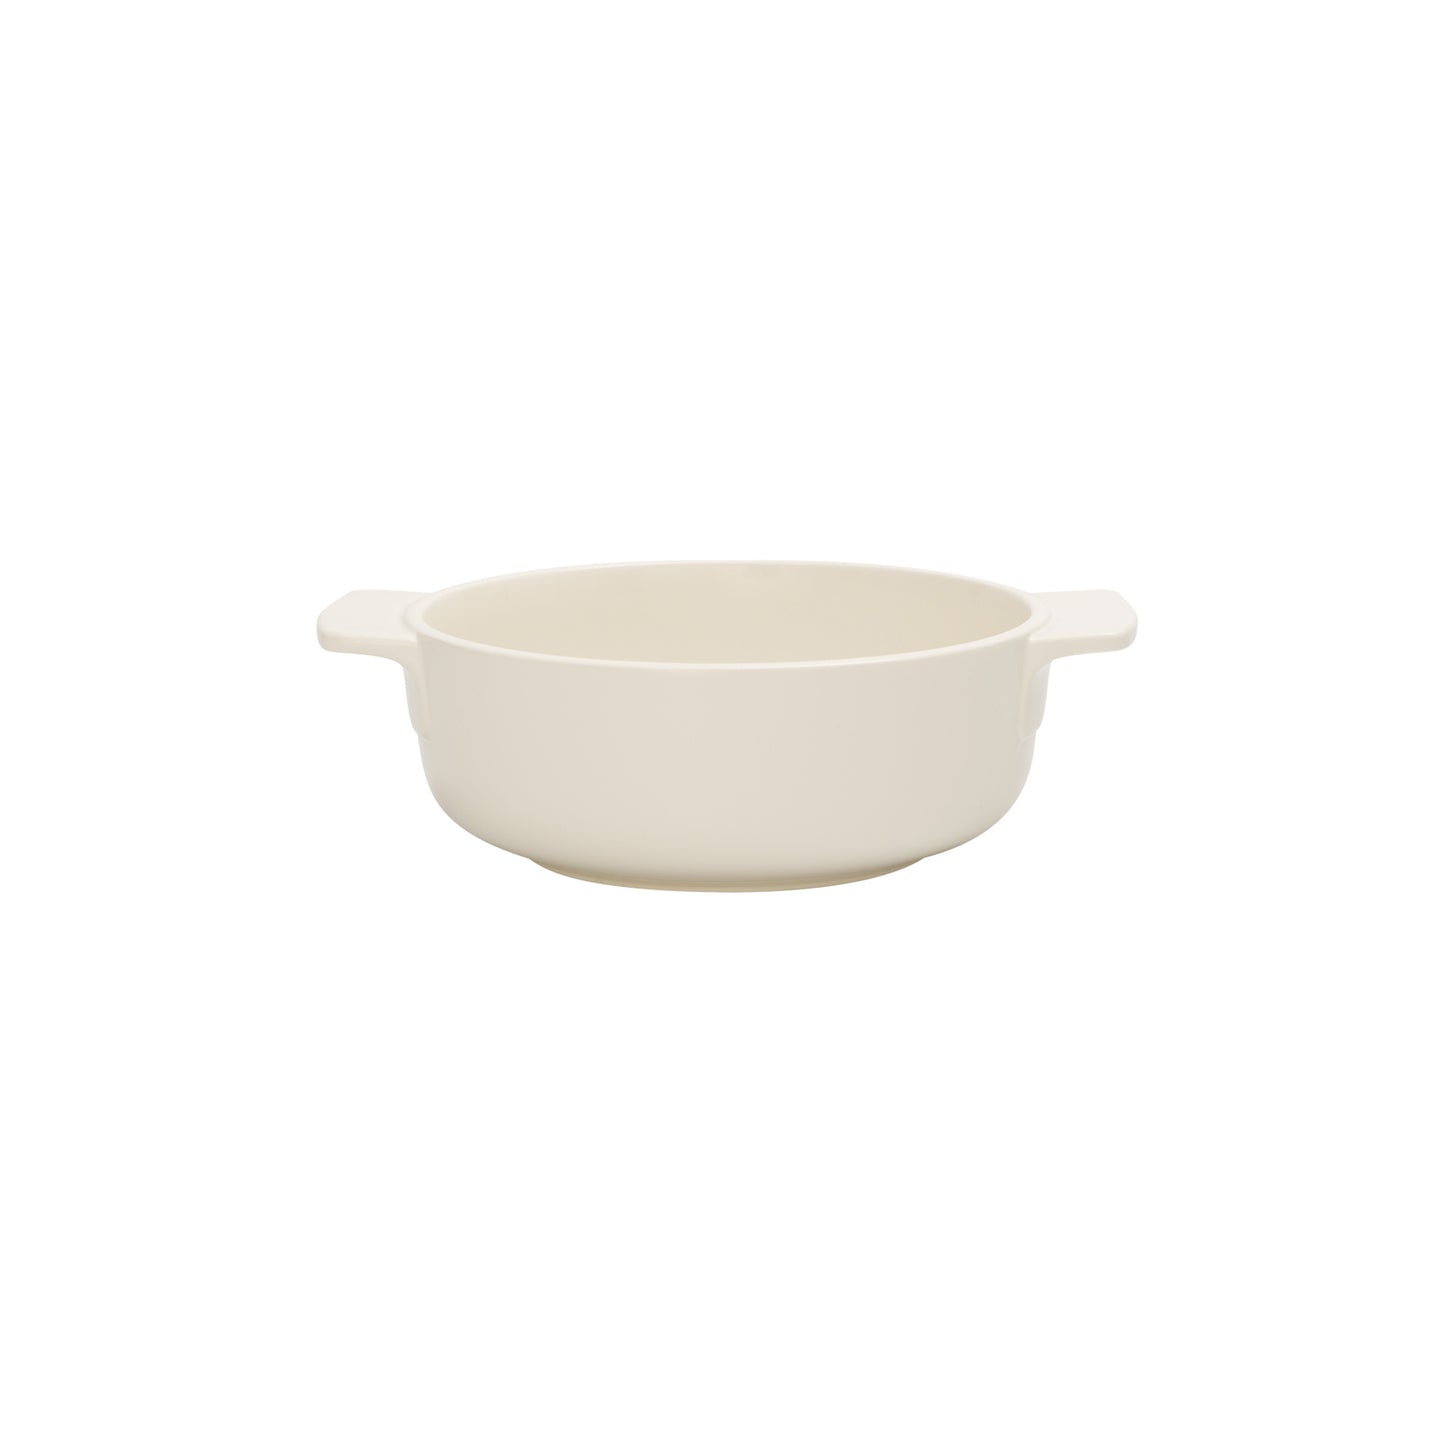 Villeroy & Boch Clever Cooking Round Individual Baking Dish